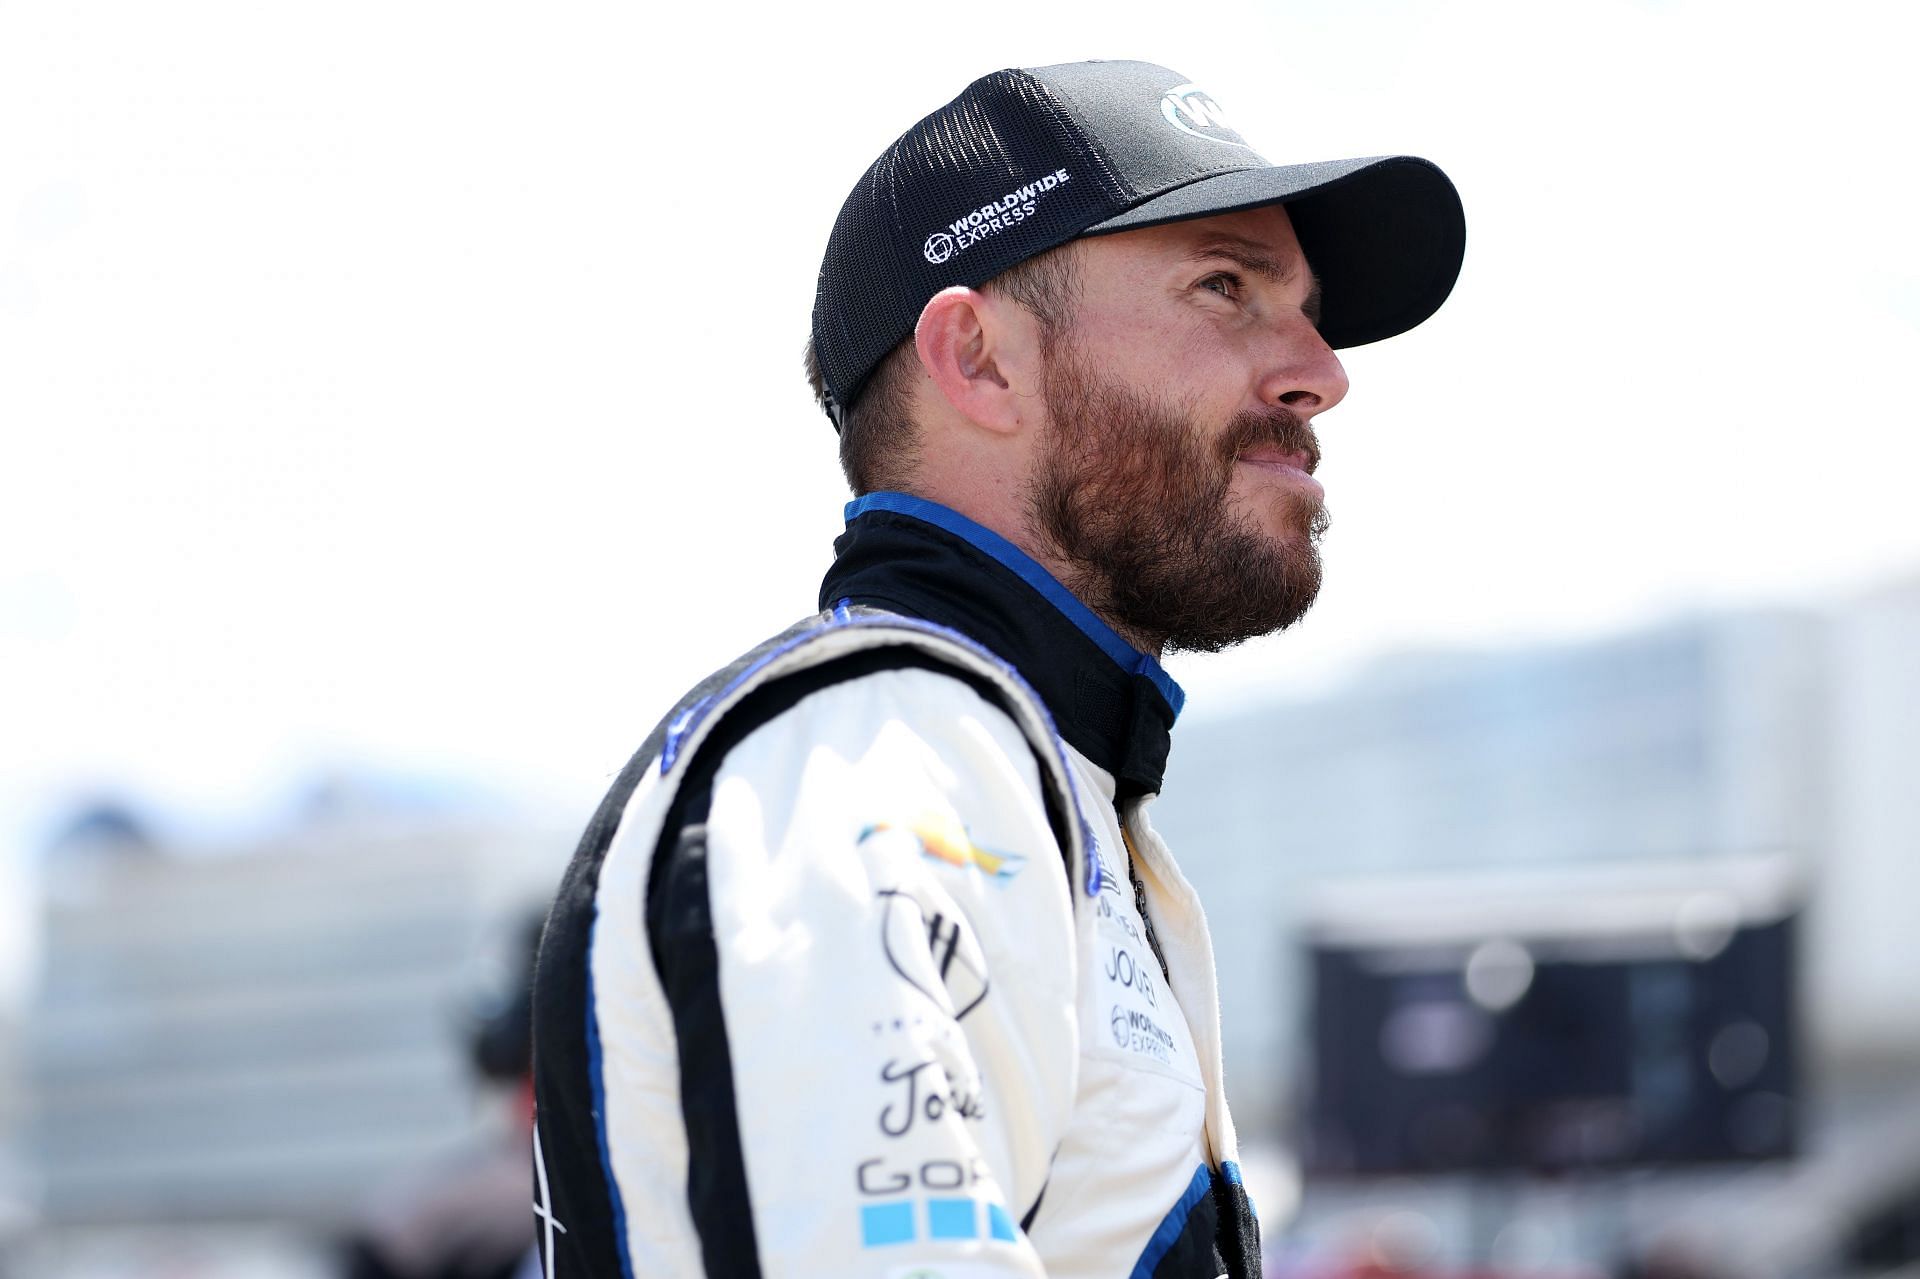 Ross Chastain looks on during qualifying for the 2022 NASCAR Camping World Truck Series North Carolina Education Lottery 200 at Charlotte Motor Speedway in Concord, North Carolina. (Photo by James Gilbert/Getty Images)